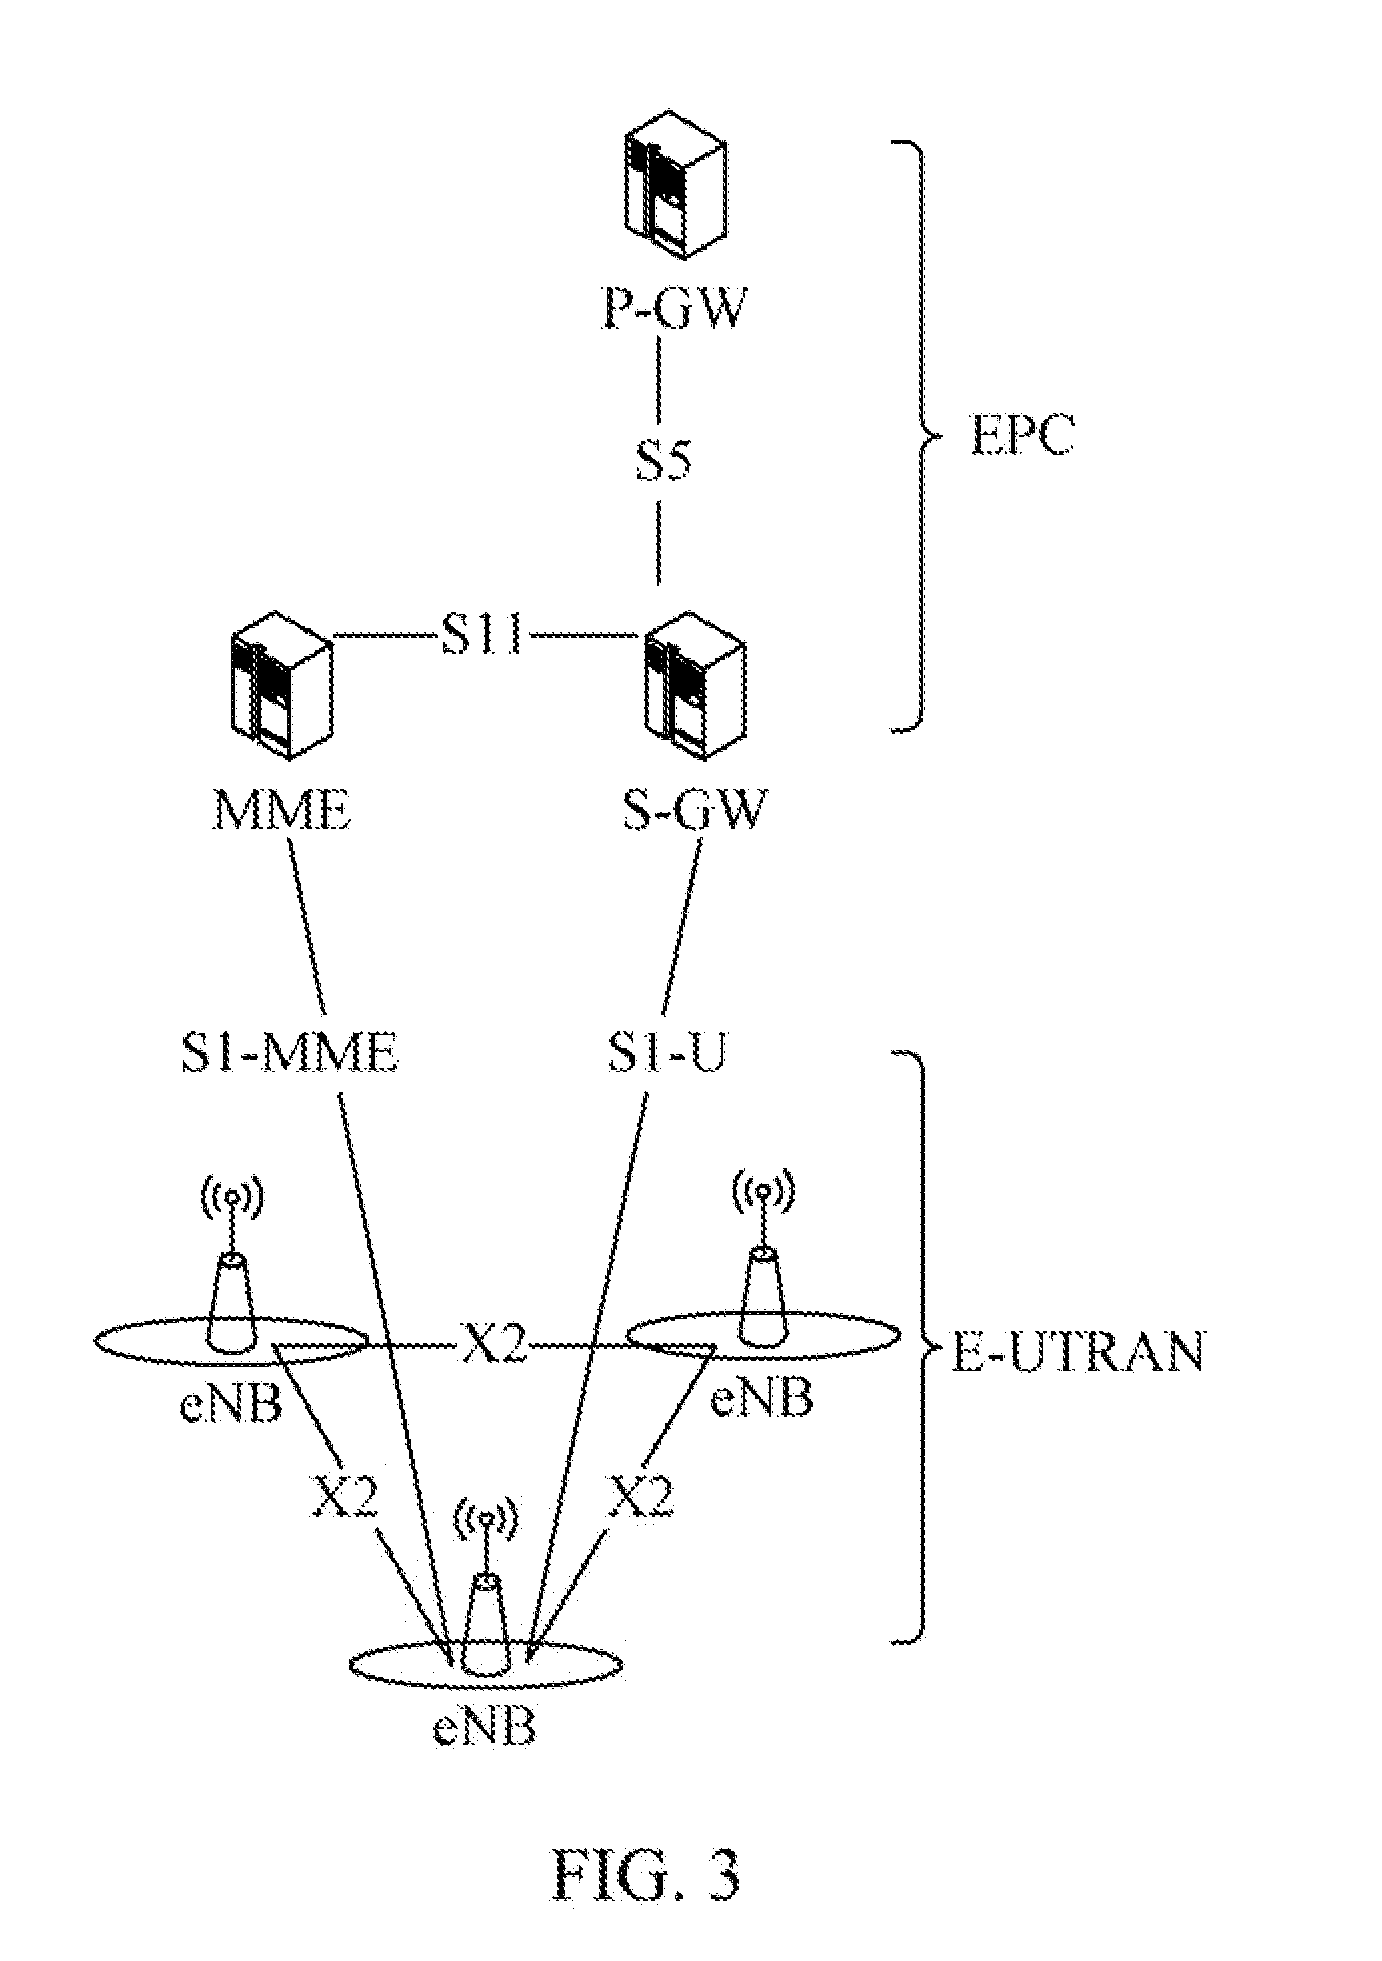 Handover Method Based on Mobile Relay and Mobile Wireless Relay System